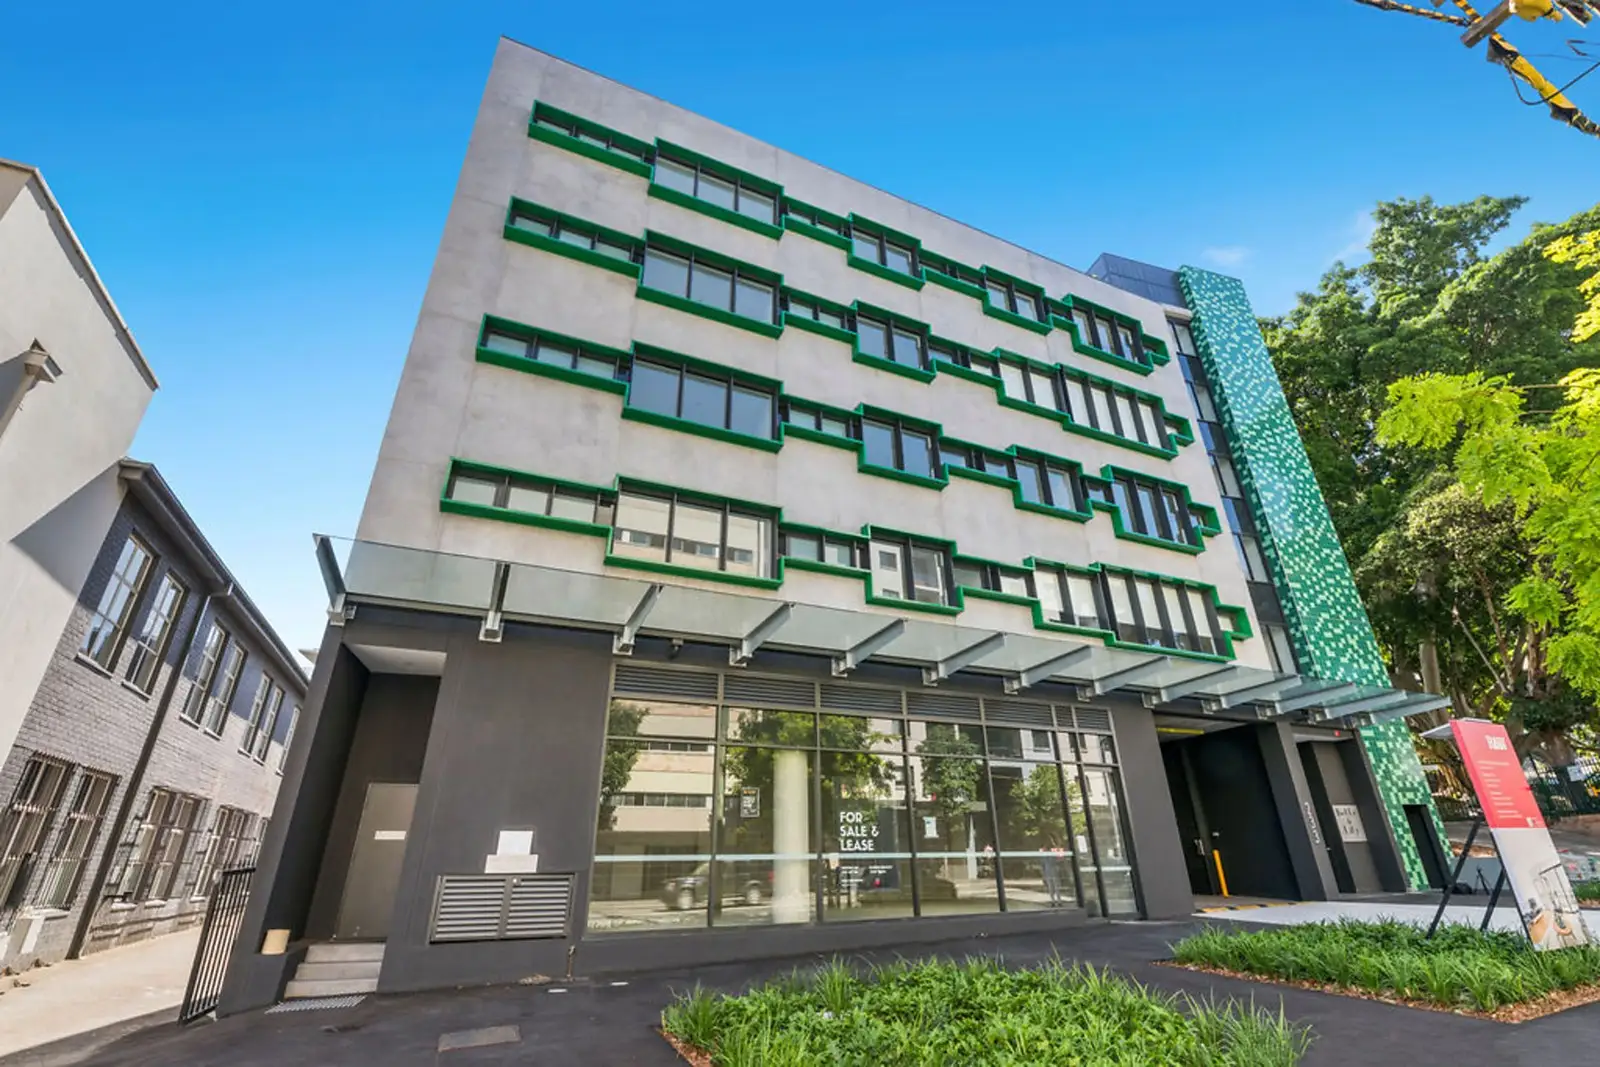 233 - 235 Botany Road, Waterloo Sold by Sydney Sotheby's International Realty - image 1